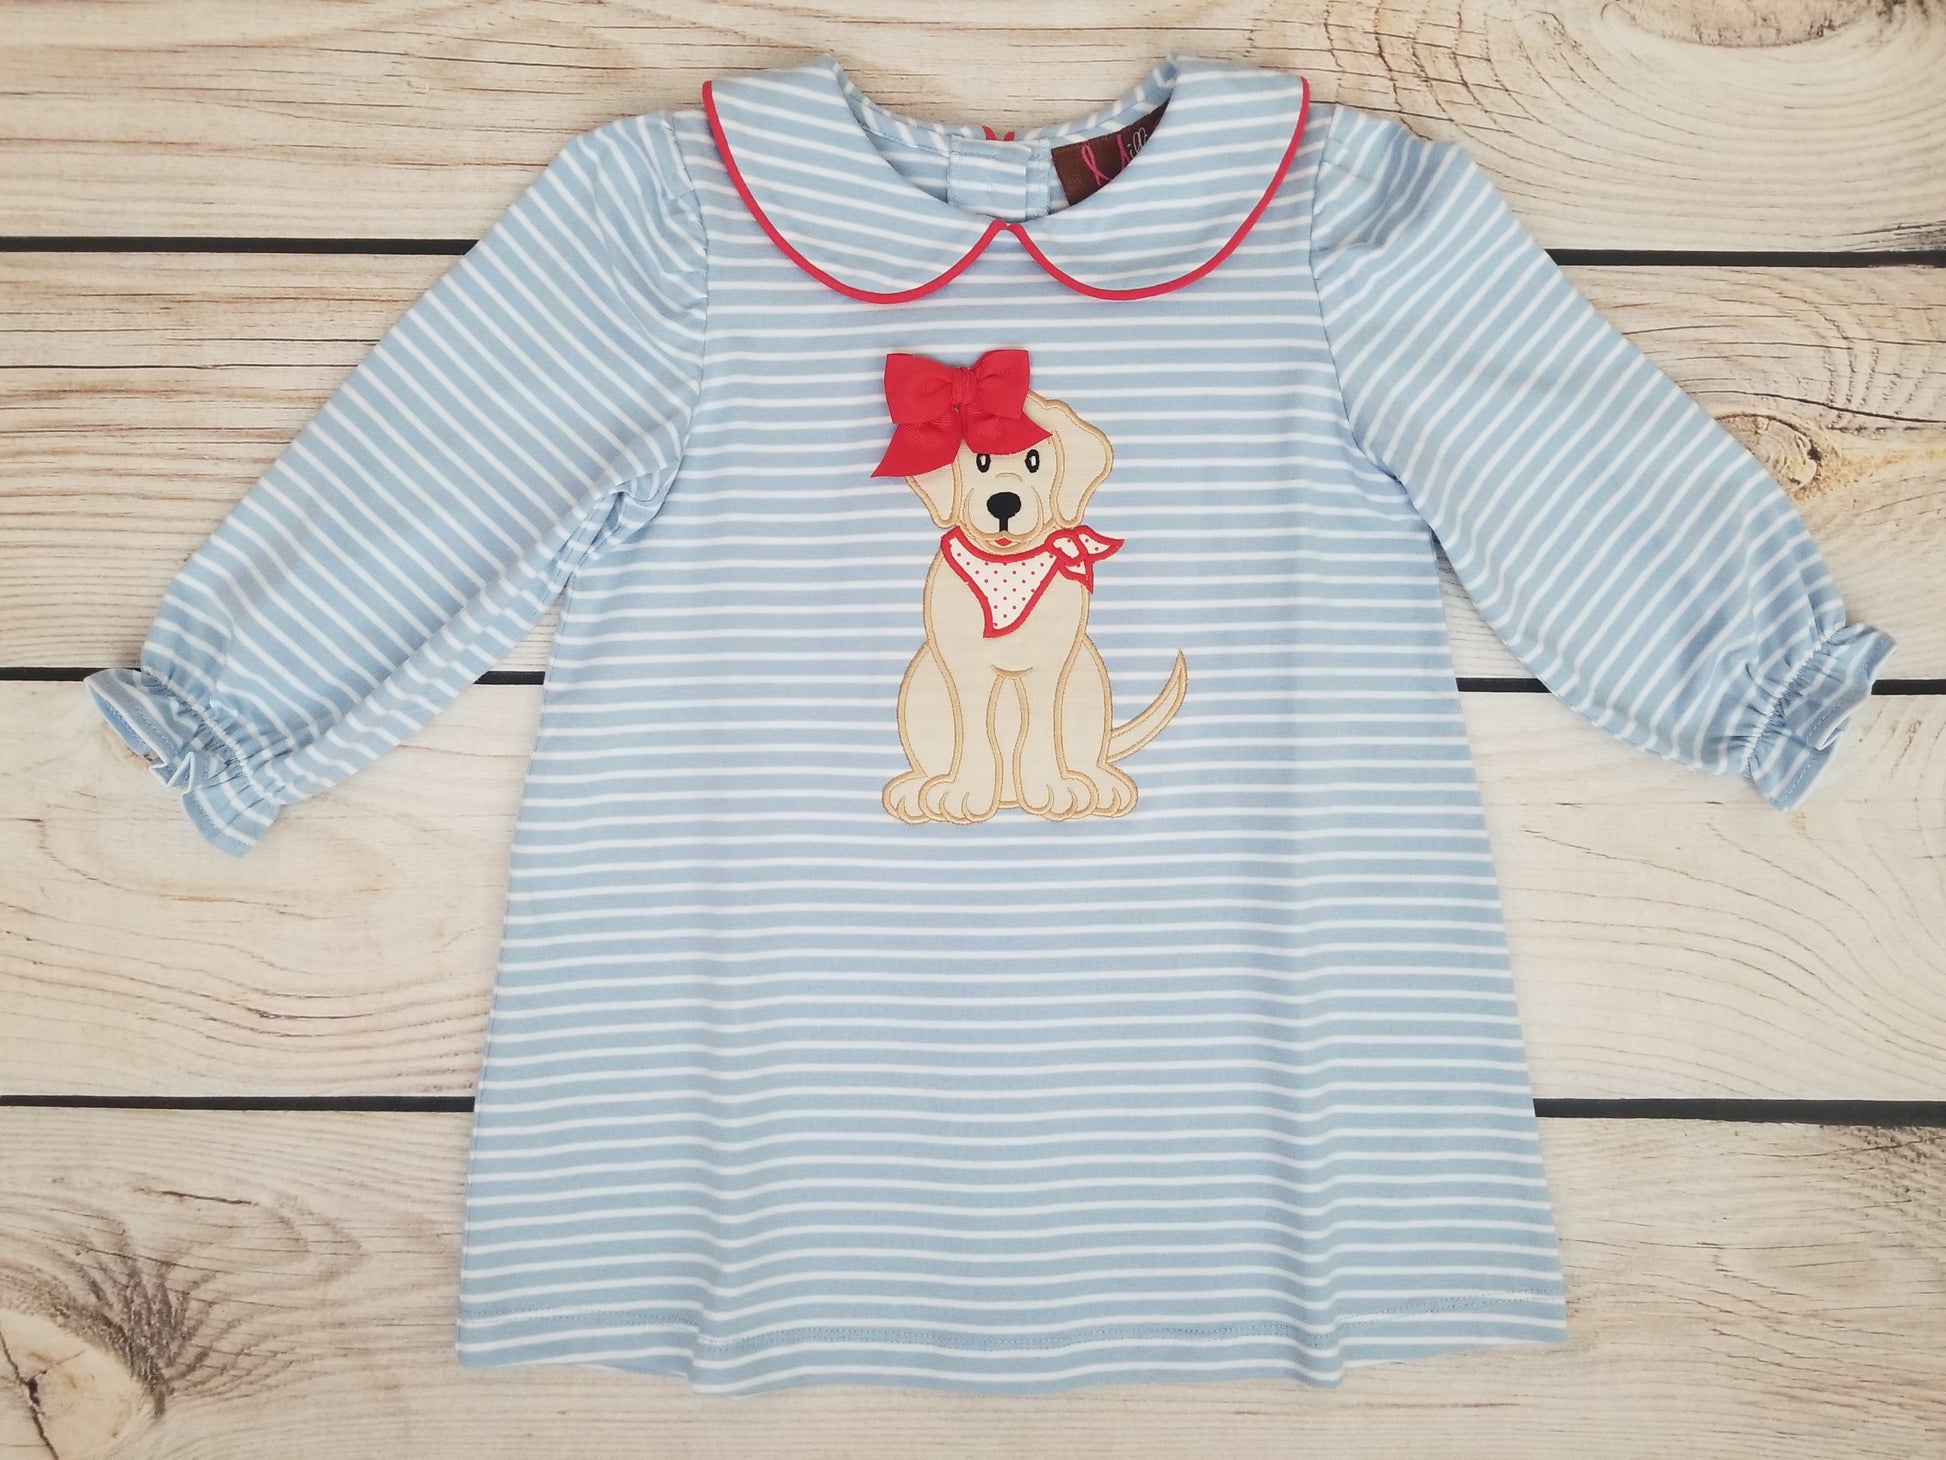 Millie Jay Pippa the Puppy Applique Dress